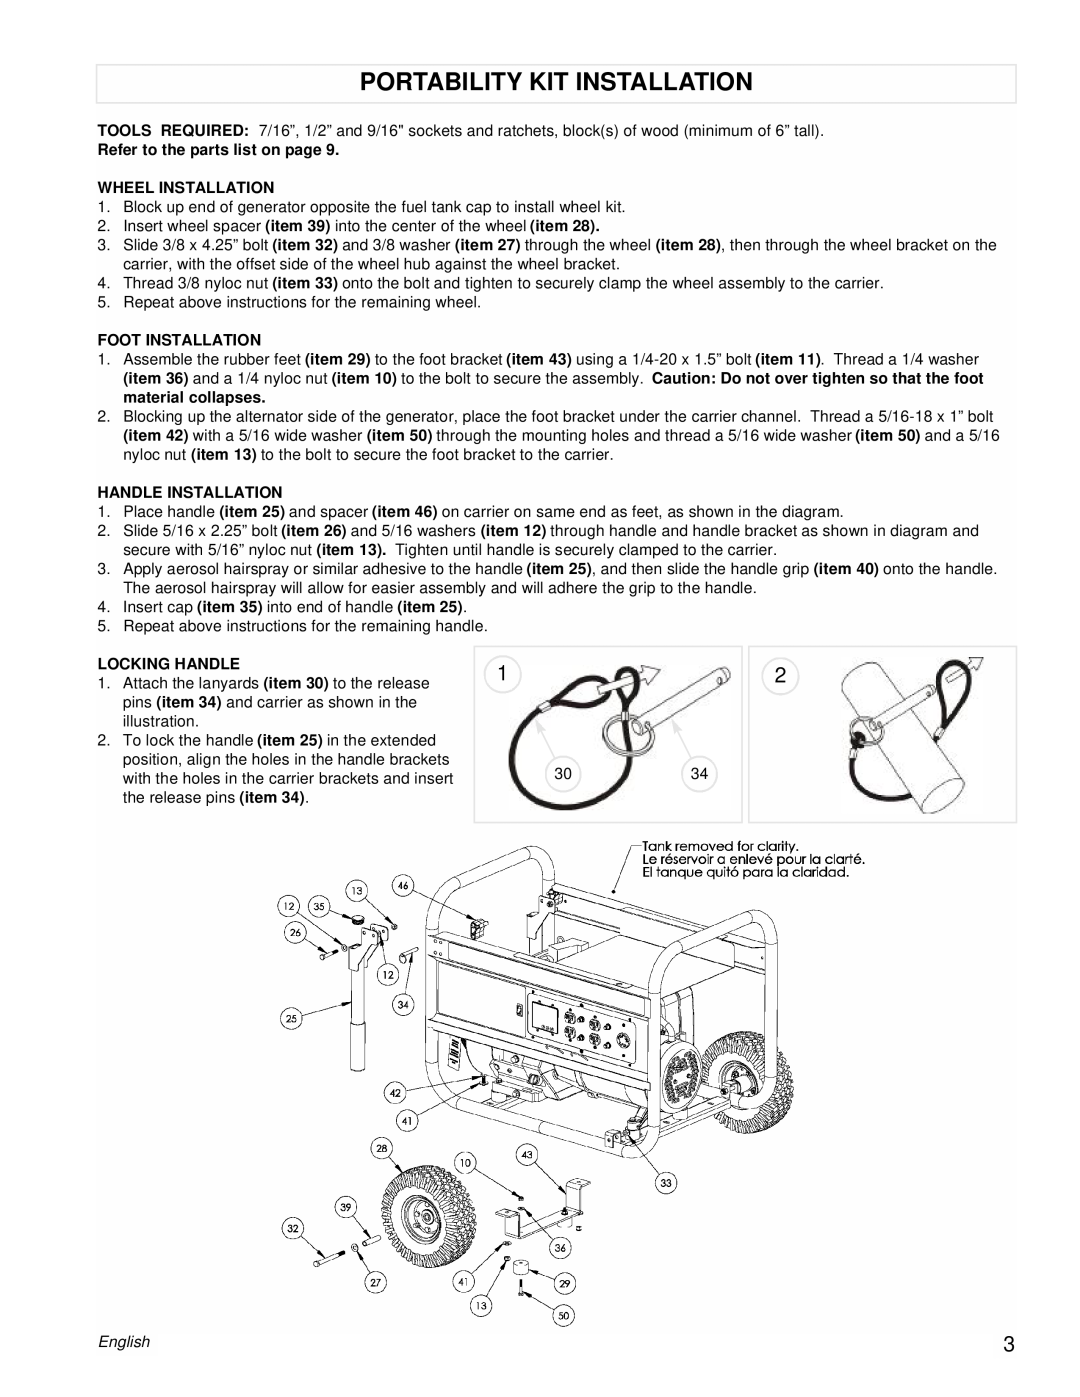 Powermate PM0497002 Portability Kit Installation, Refer to the parts list on page, Wheel Installation, Foot Installation 